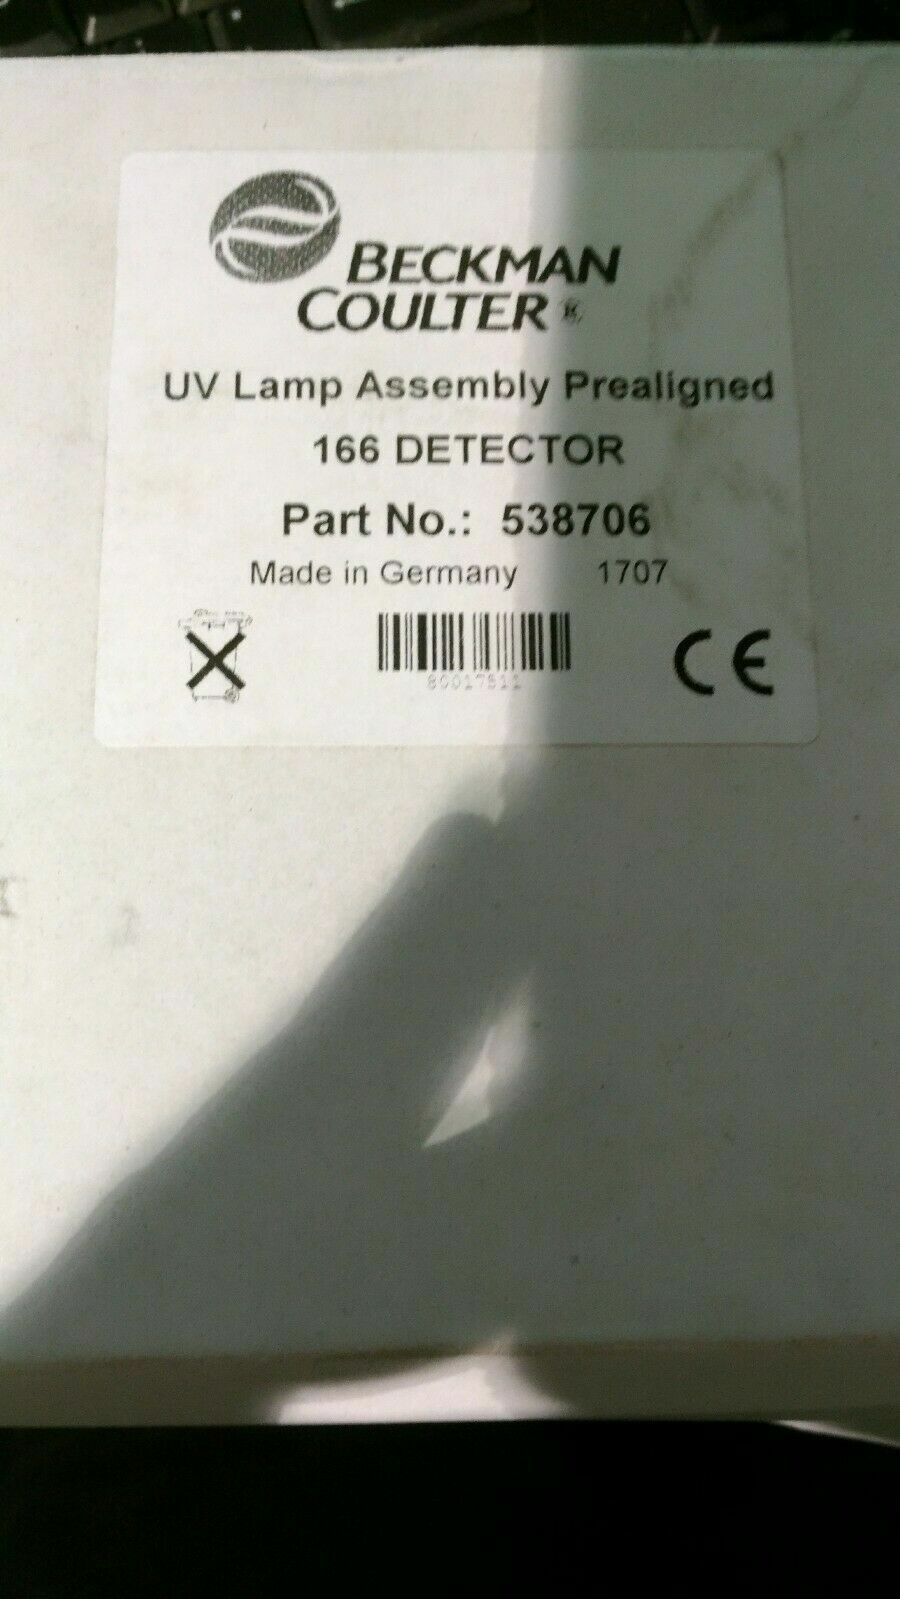 Beckman Coulter UV Lamp Assembly Prealigned 166 Detector Part No: 538706 22